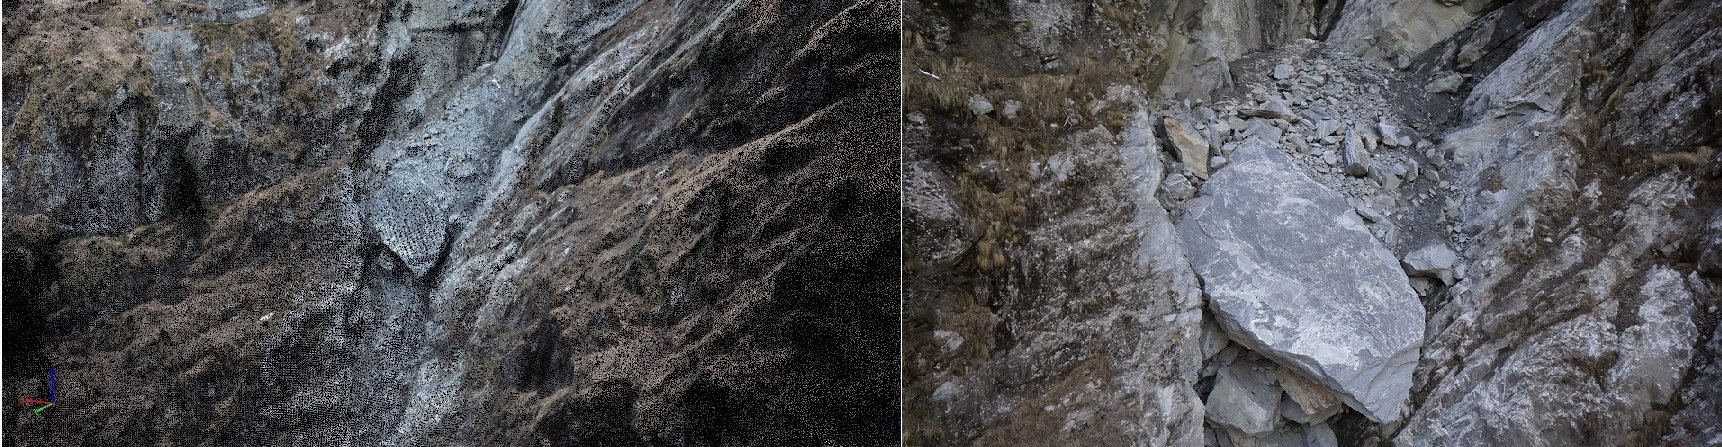 Two images of the rock fall - left showing the target rock in a Pix4Dmapper point cloud, and the right a photograph of the rock.